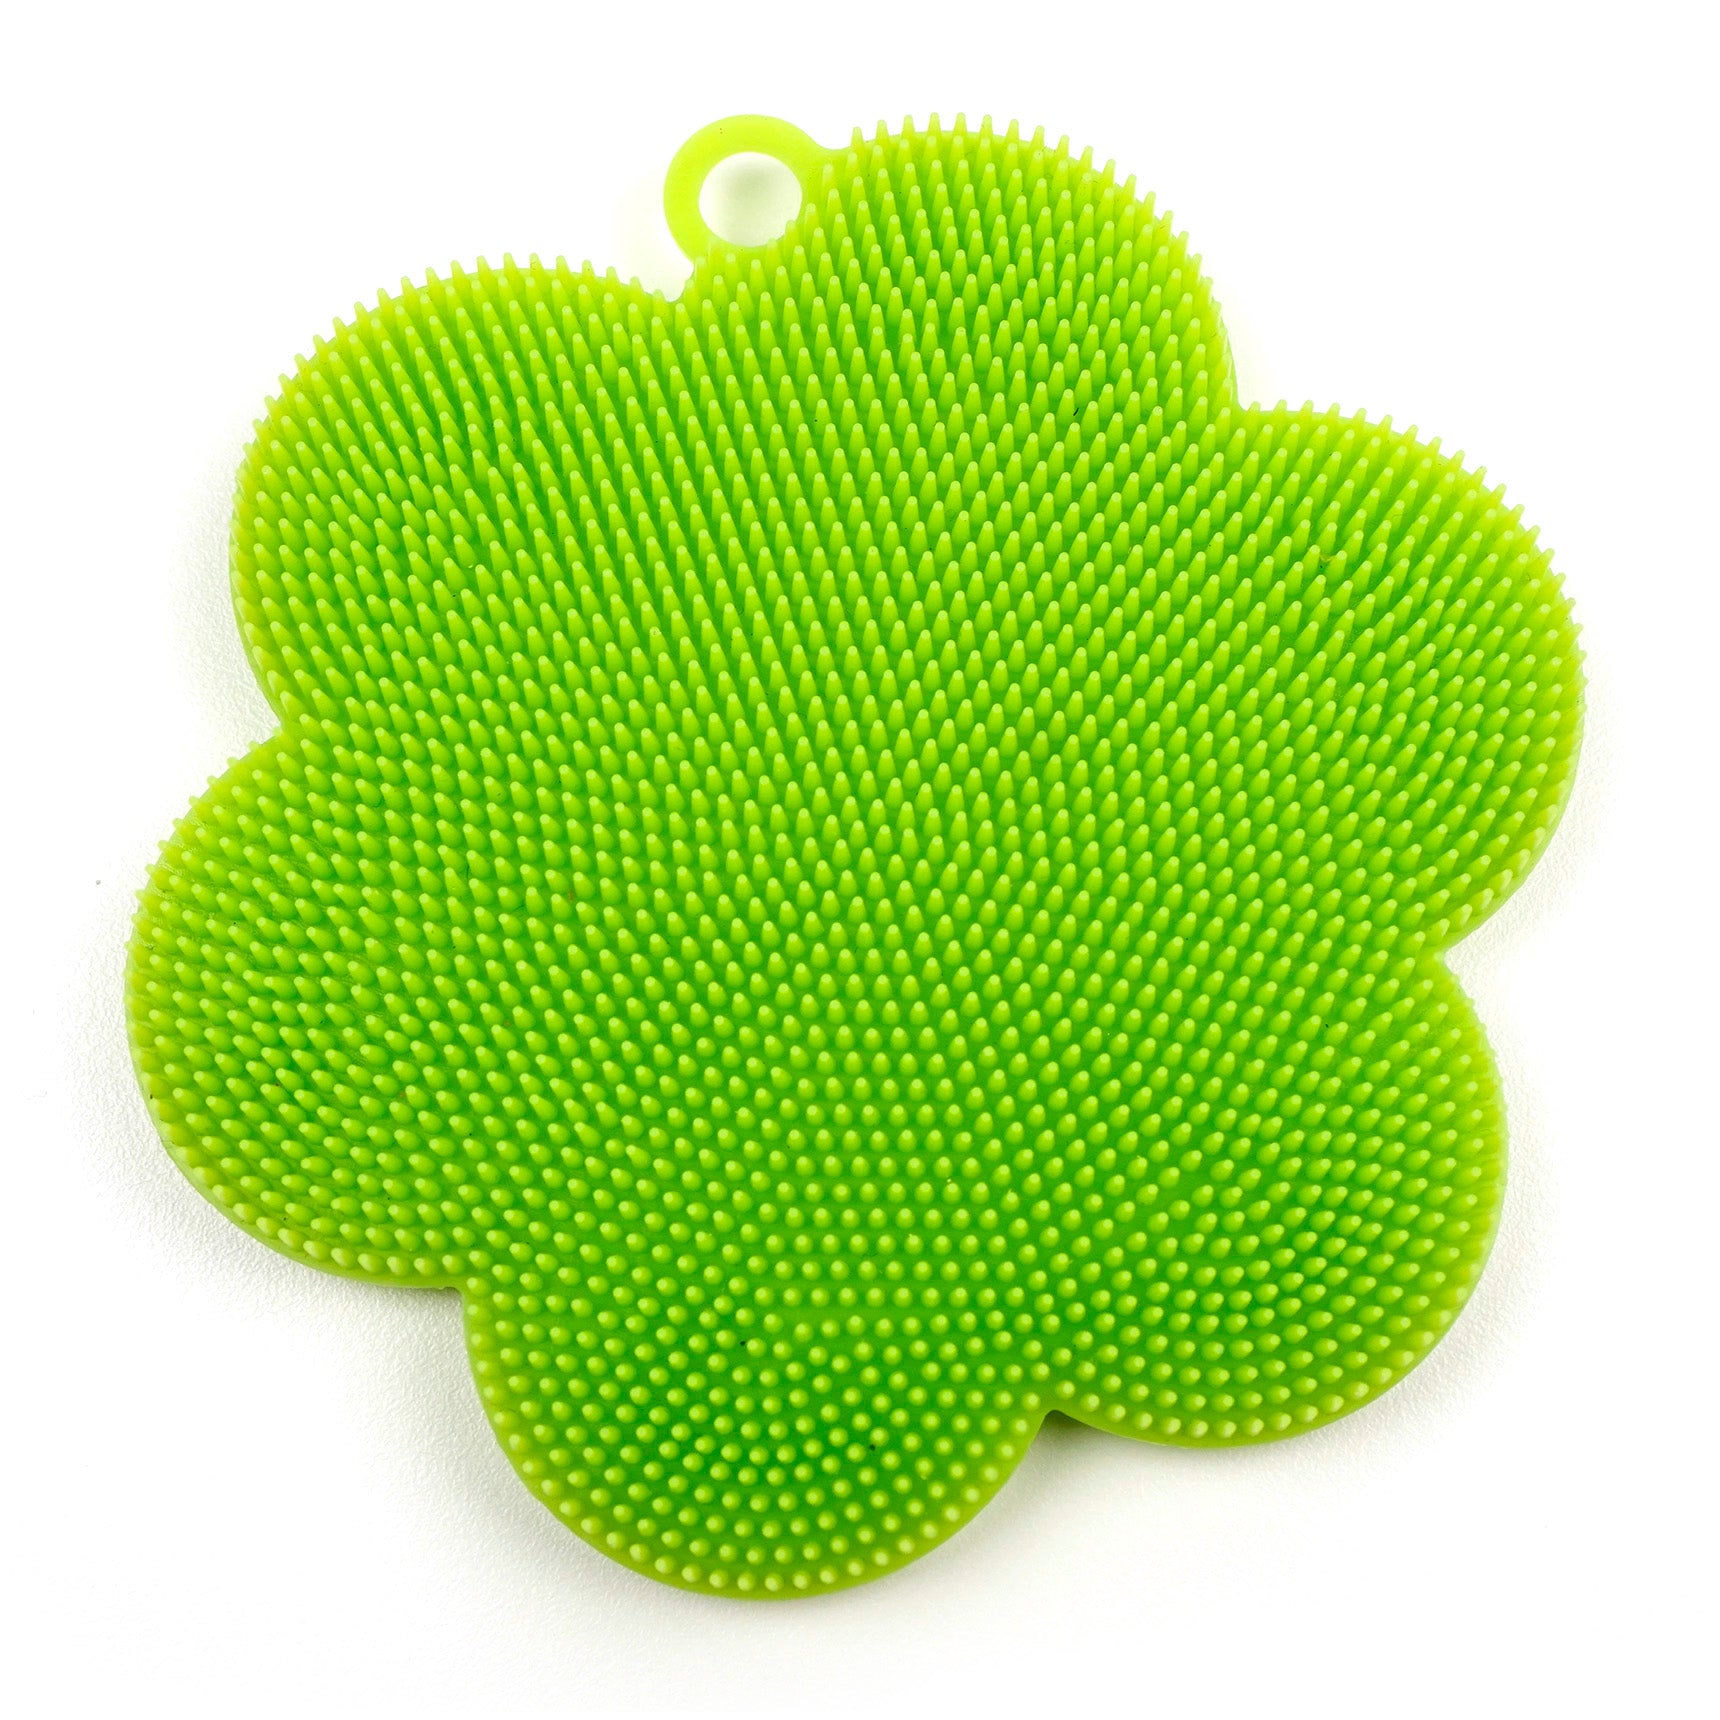 green silicone scrubber on white background.